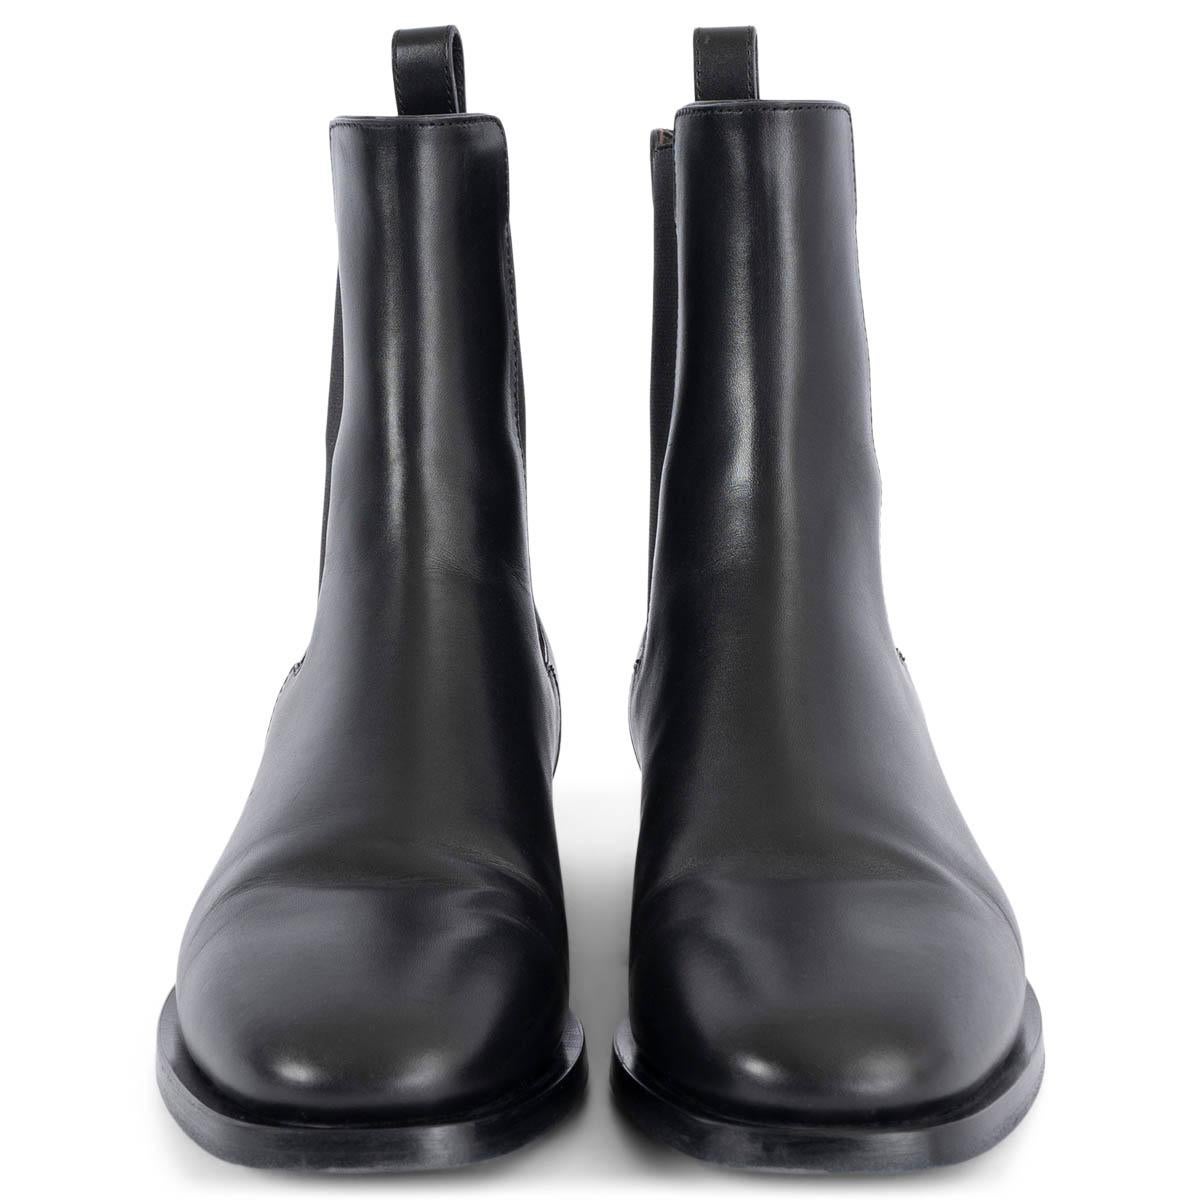 100% authentic The Row Grunge Chelsea boots in black smooth calfskin with a pull tab on the back. Have been worn and are in excellent condition. 

Measurements
Imprinted Size	38.5
Shoe Size	38.5
Inside Sole	25.5cm (9.9in)
Width	8cm